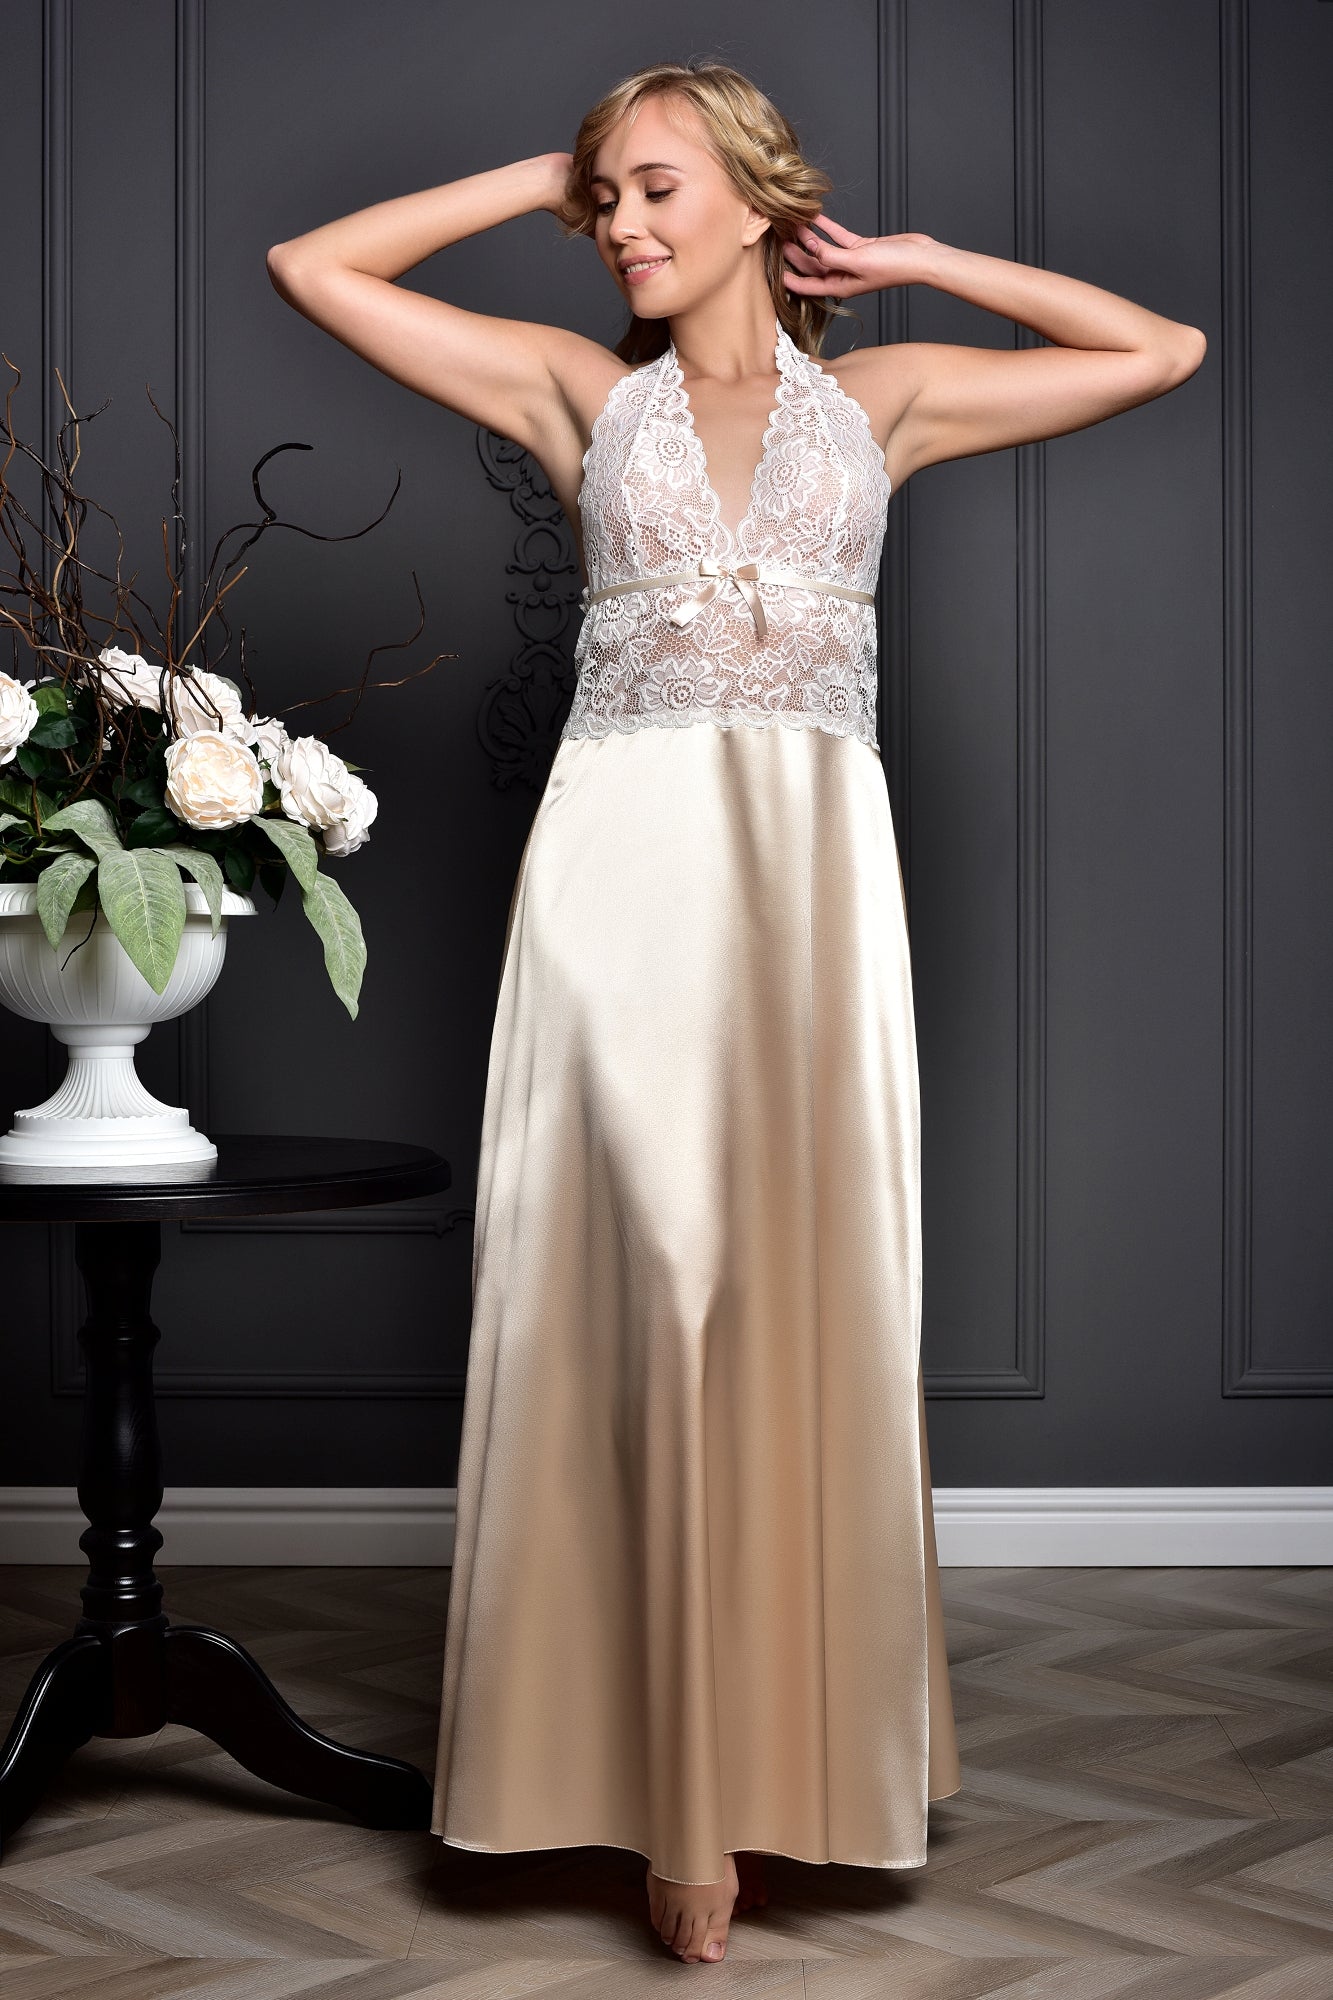 Bridal Nightgown in Beige Color